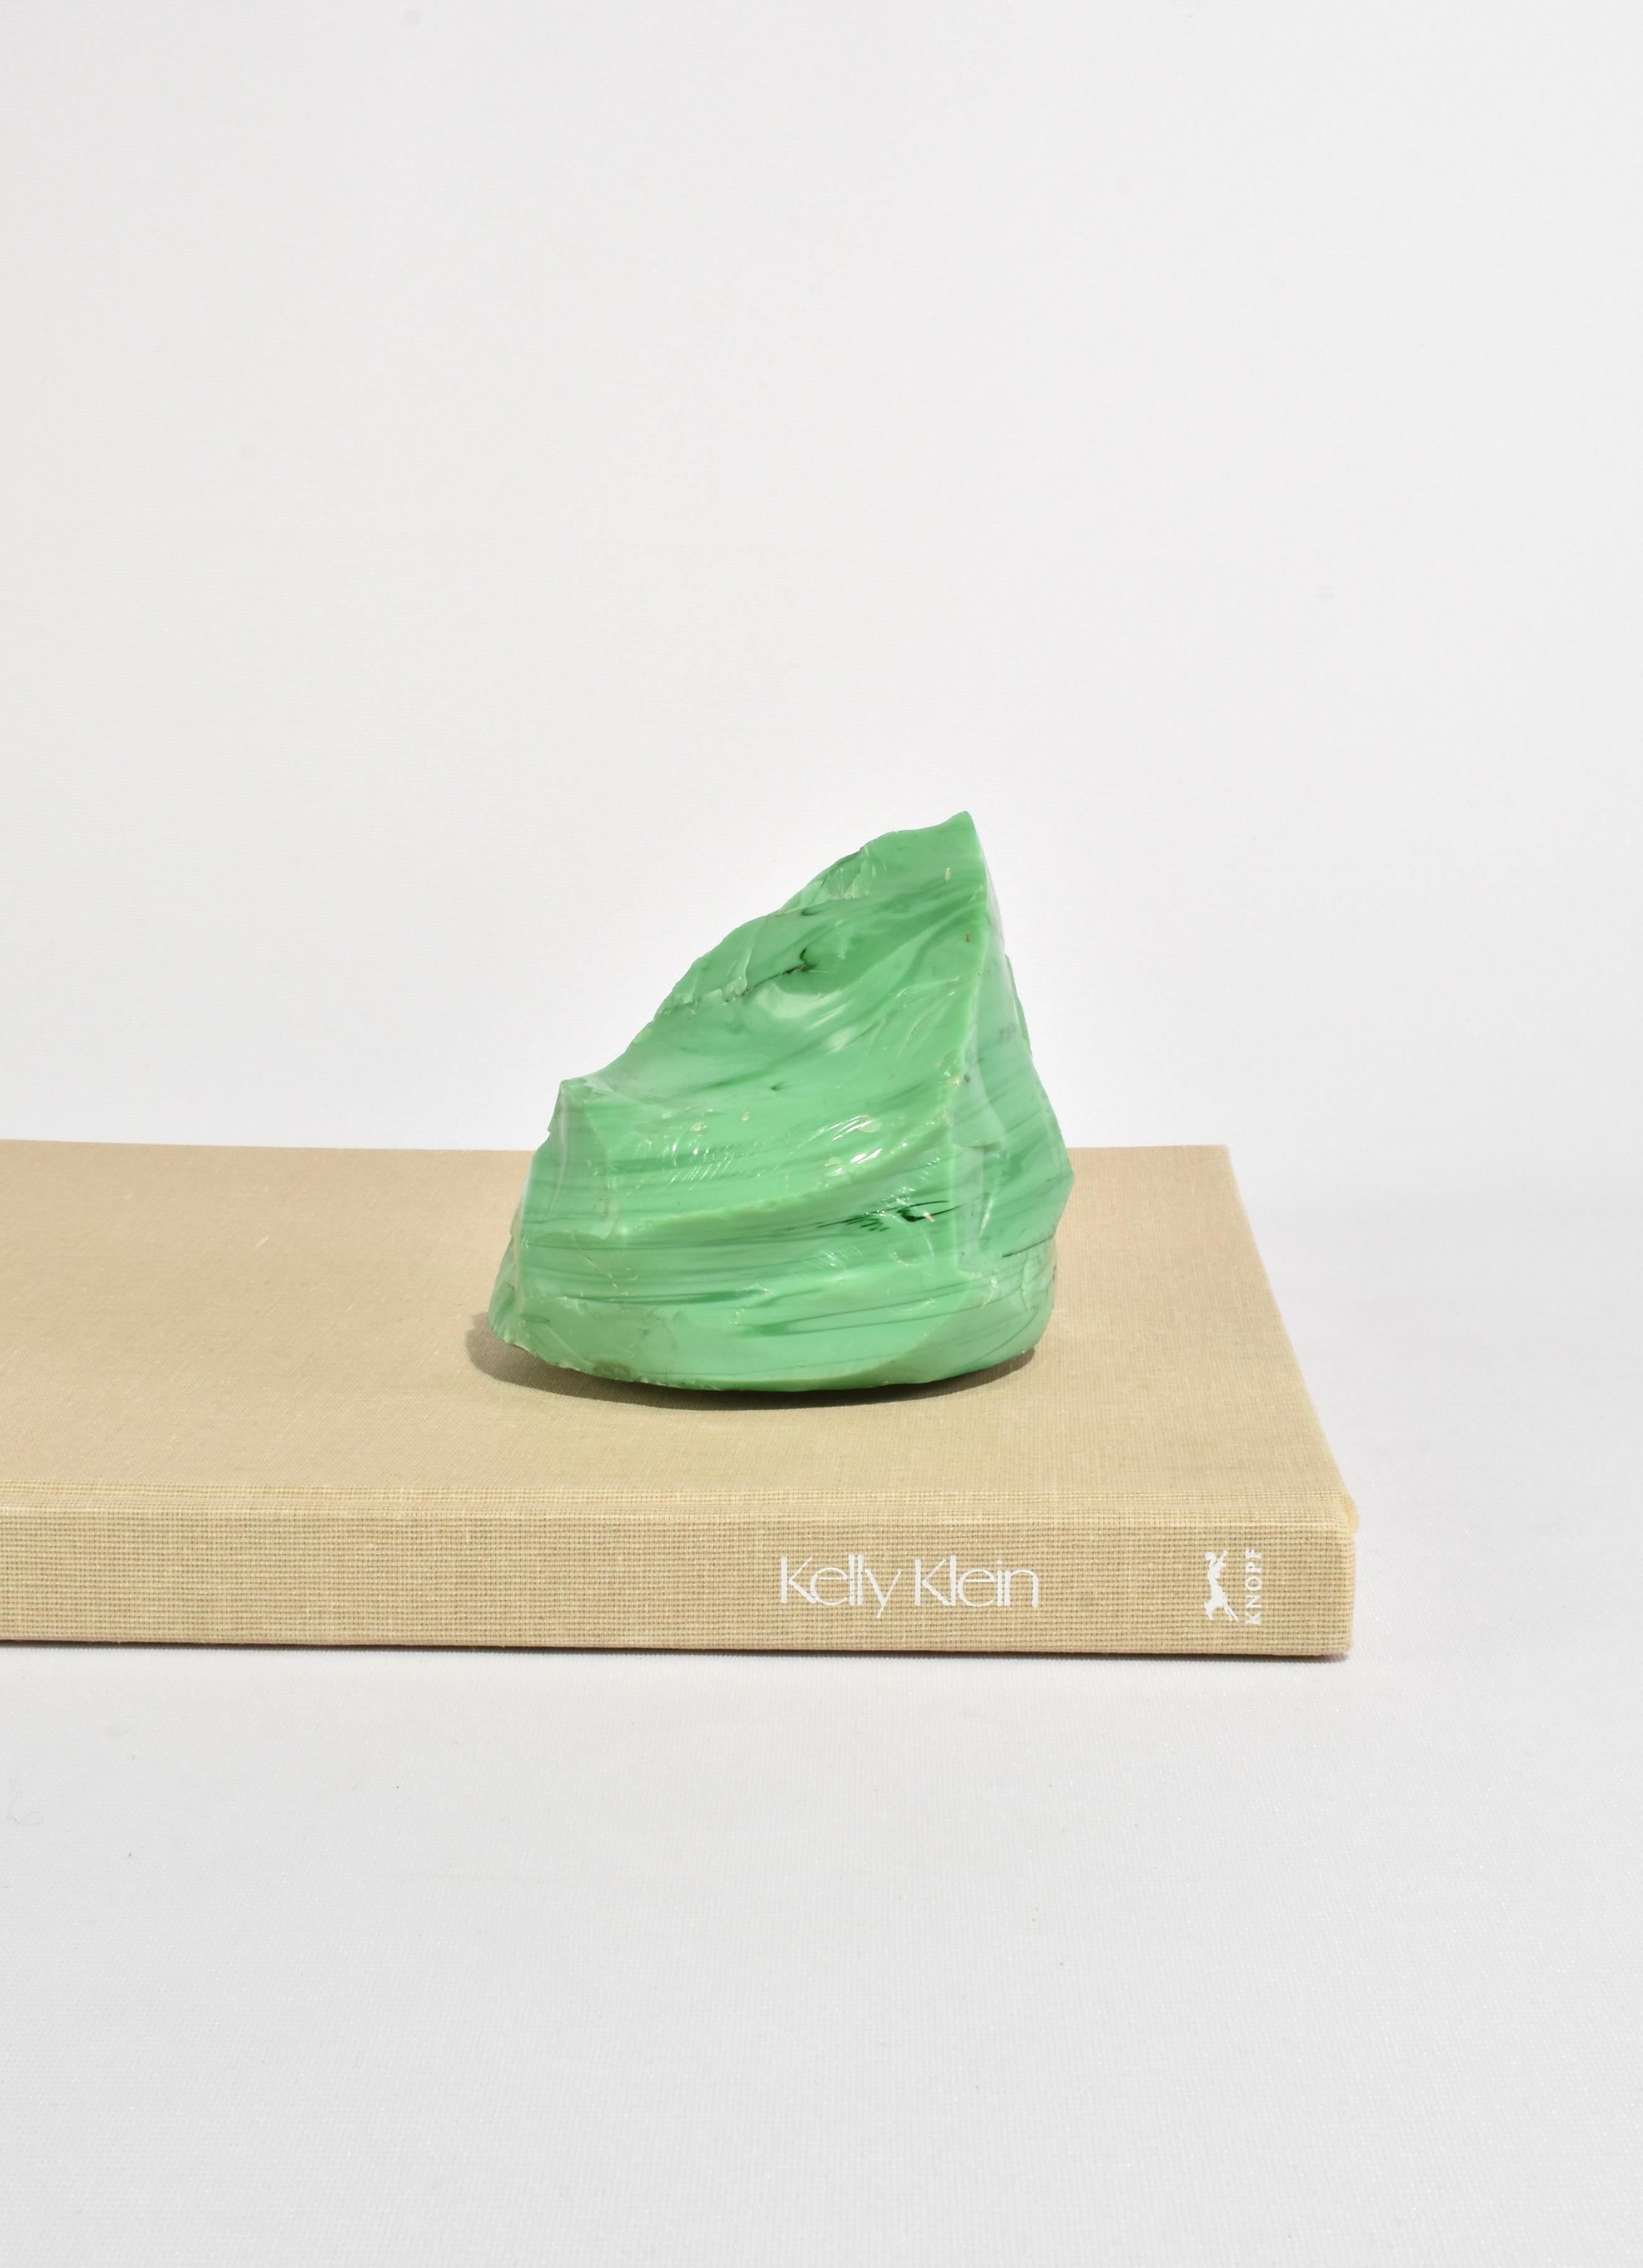 Slag glass sculpture in a beautiful green color. Display on its own or with an arrangement of books as a small bookend.